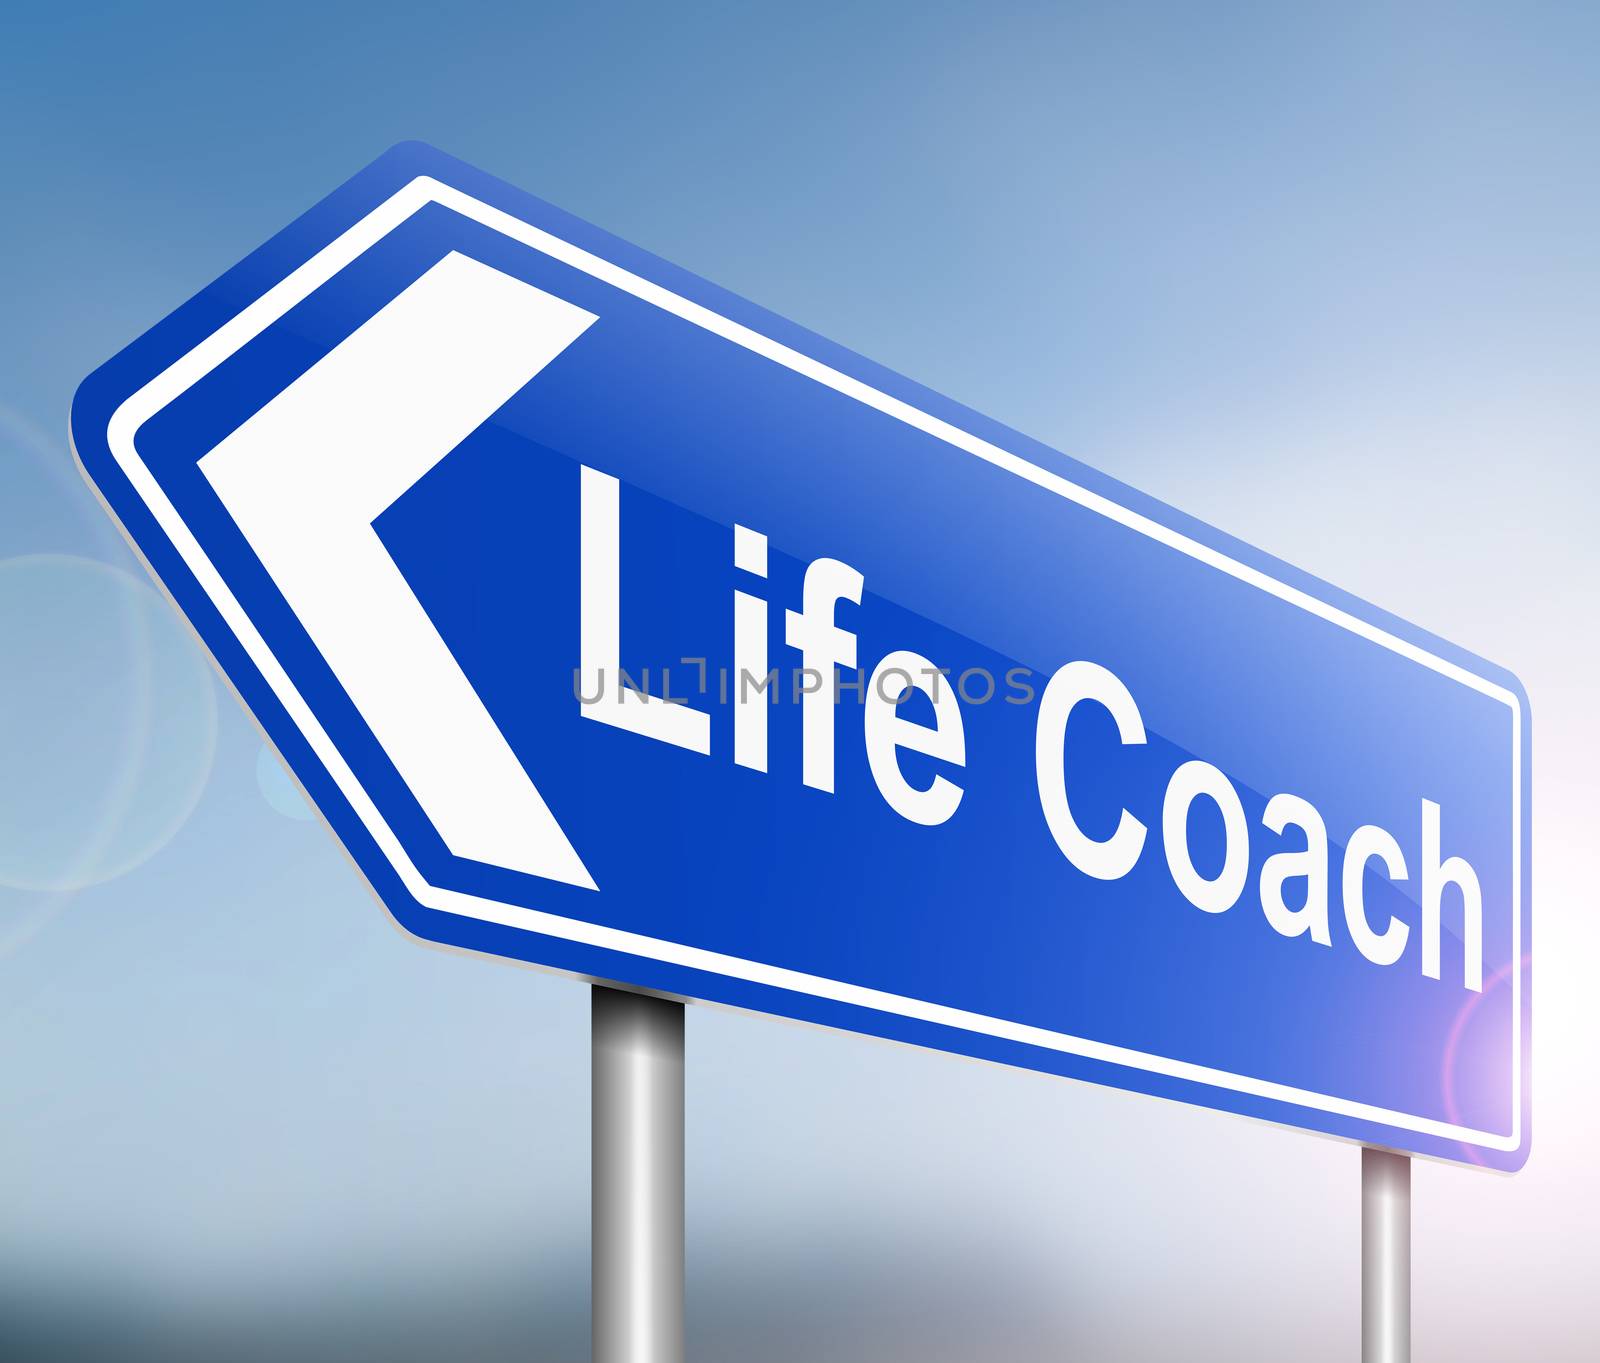 Illustration depicting a sign with a life coach concept.